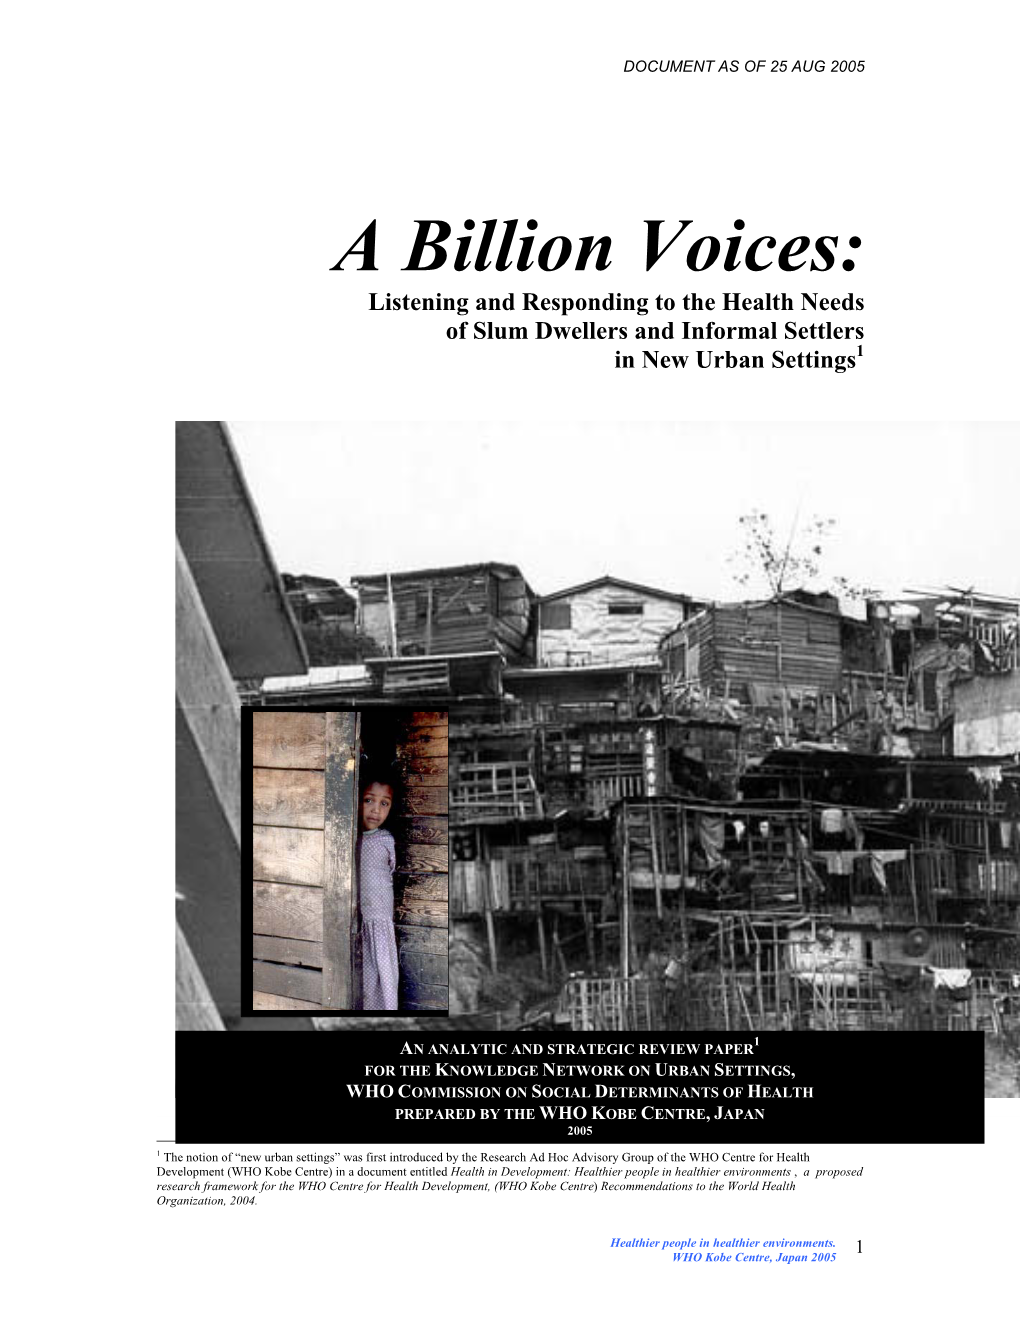 A Billion Voices: Listening and Responding to the Health Needs of Slum Dwellers and Informal Settlers in New Urban Settings1